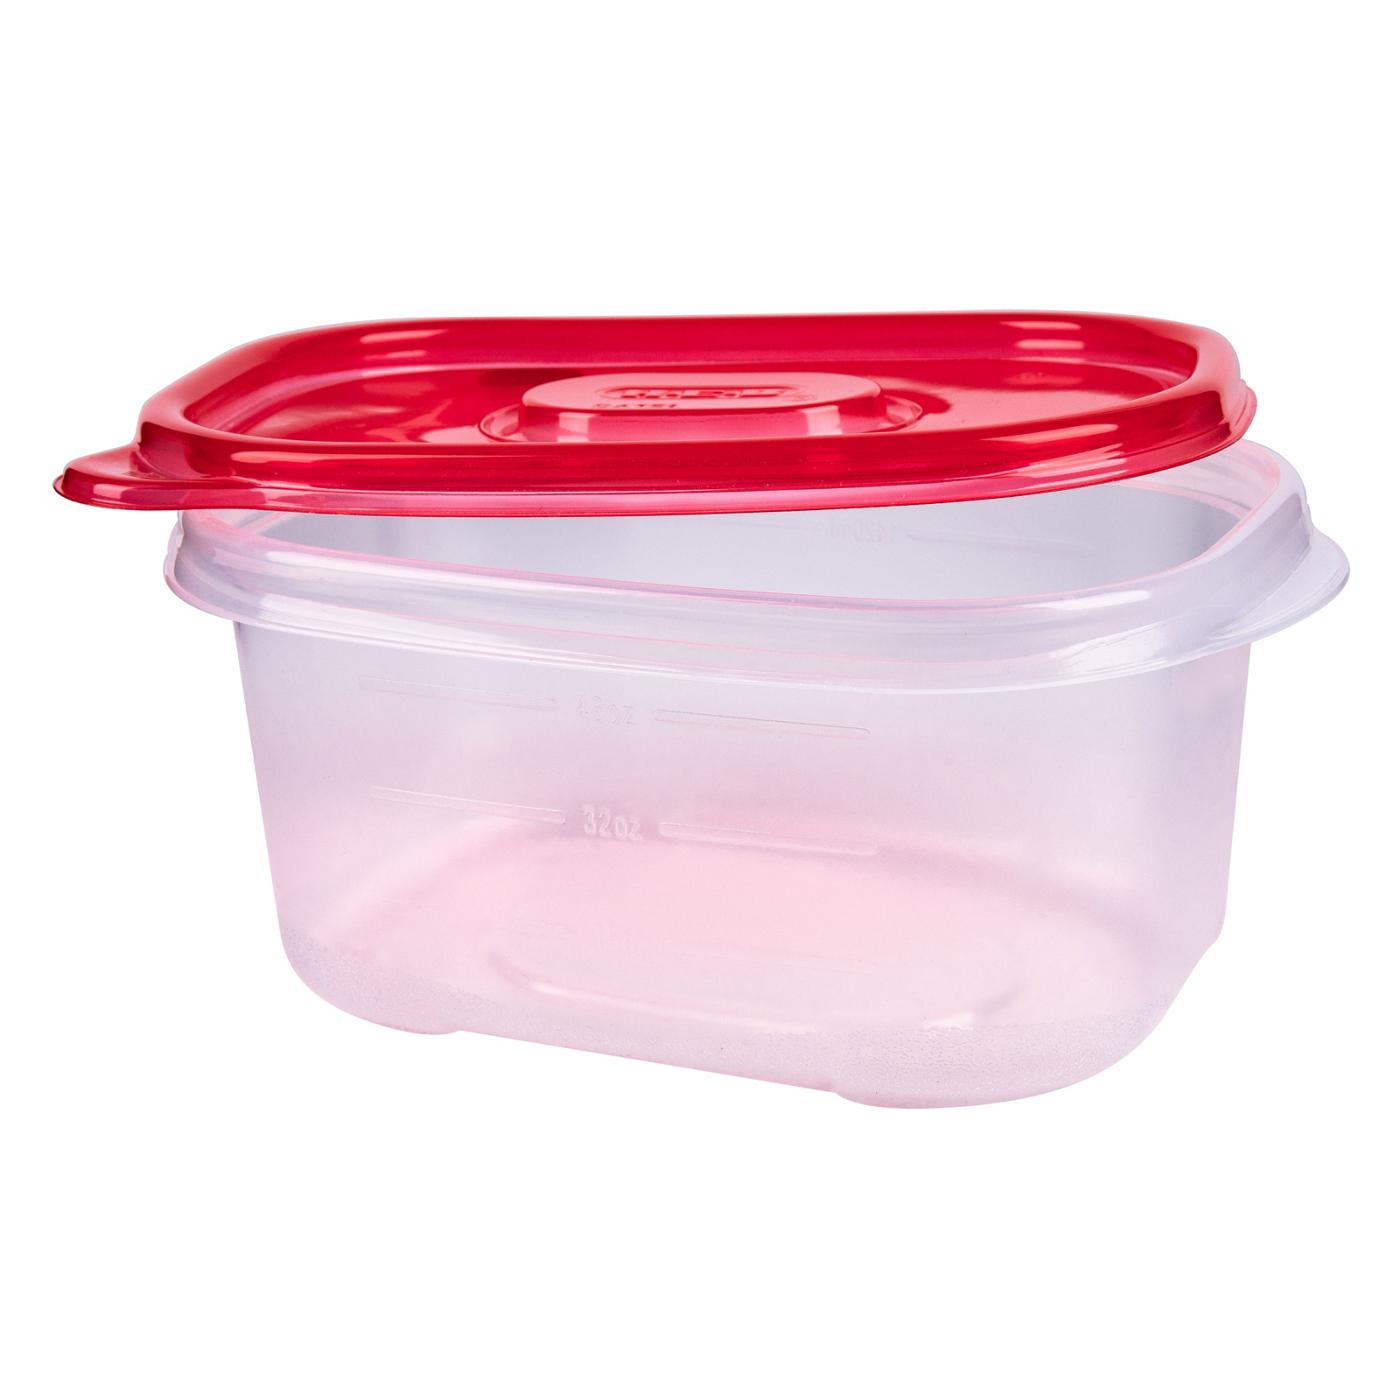 H-E-B Texas Tough Small Rectangle Reusable Containers with Lids